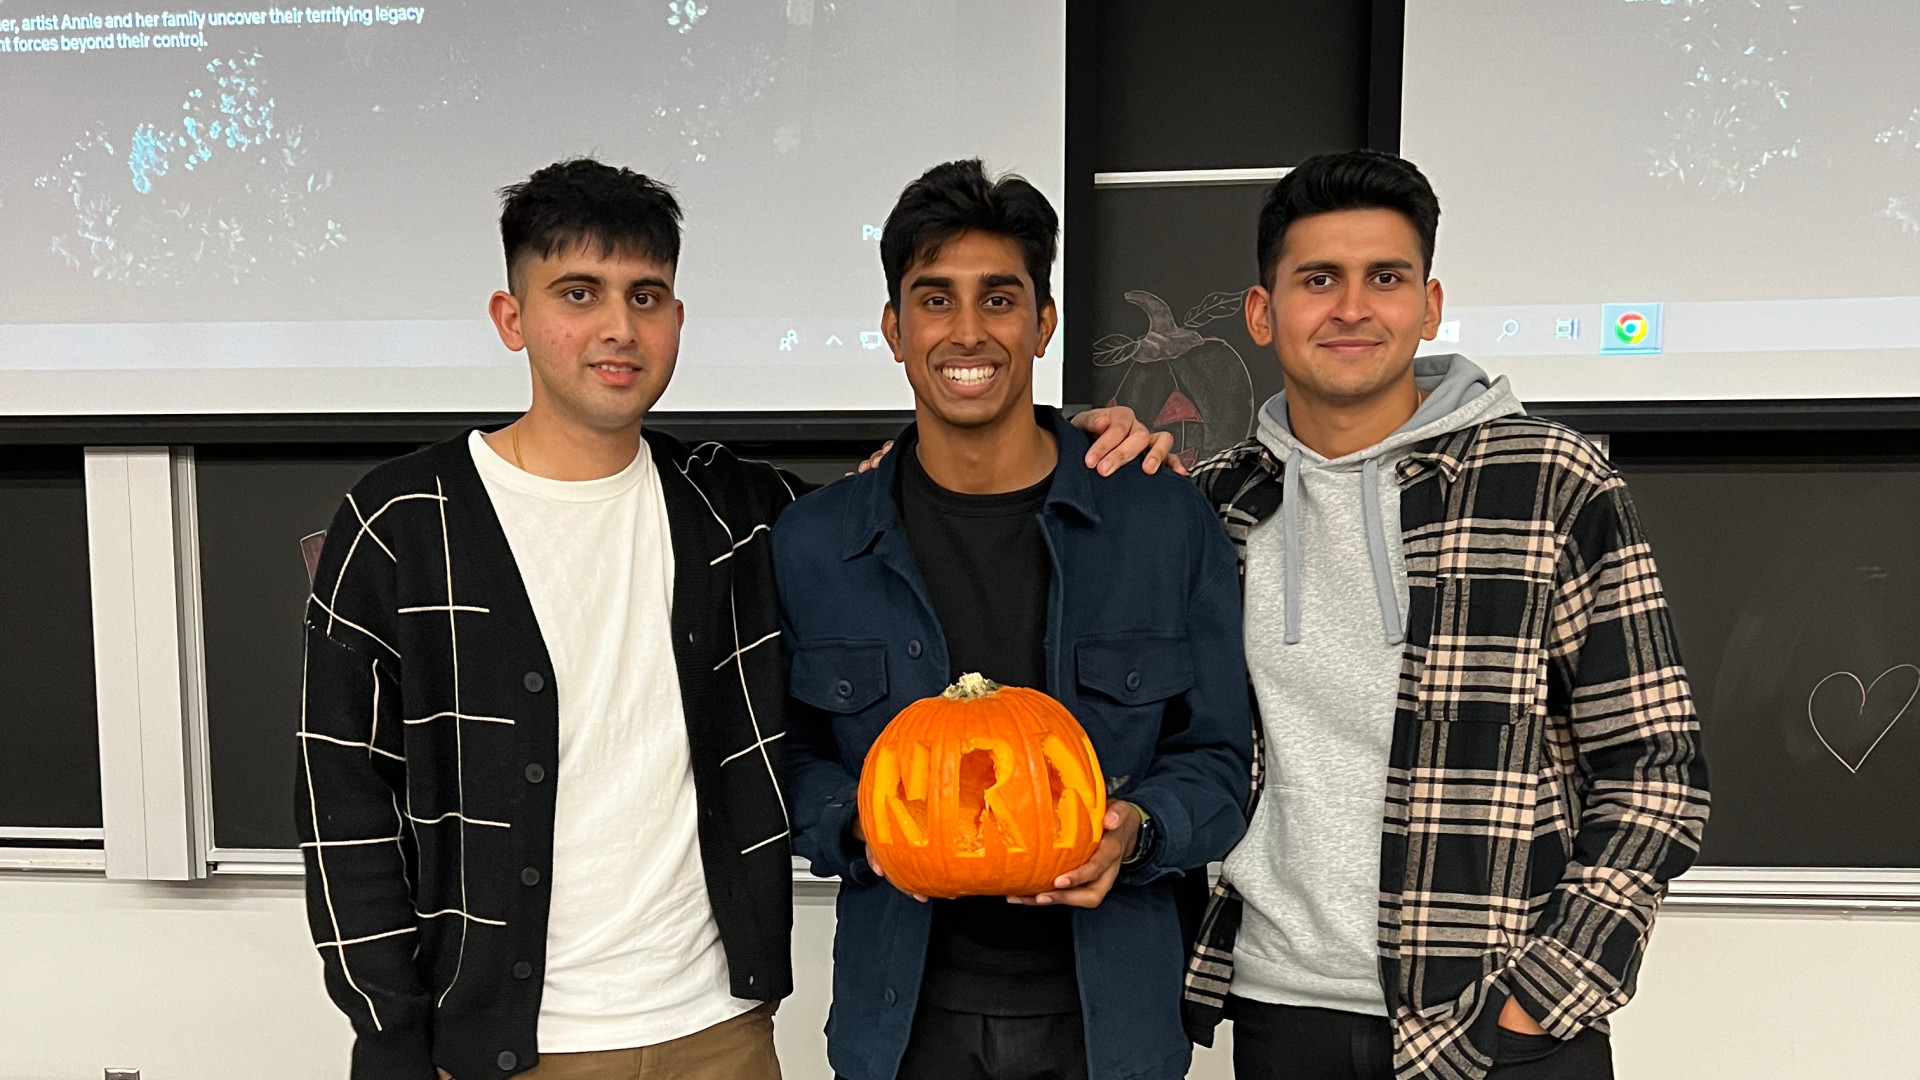 Our BTO co-presidents pose with their pumpkin carved with their initials during the 2022 Halloween Pumpkin Carving Night.